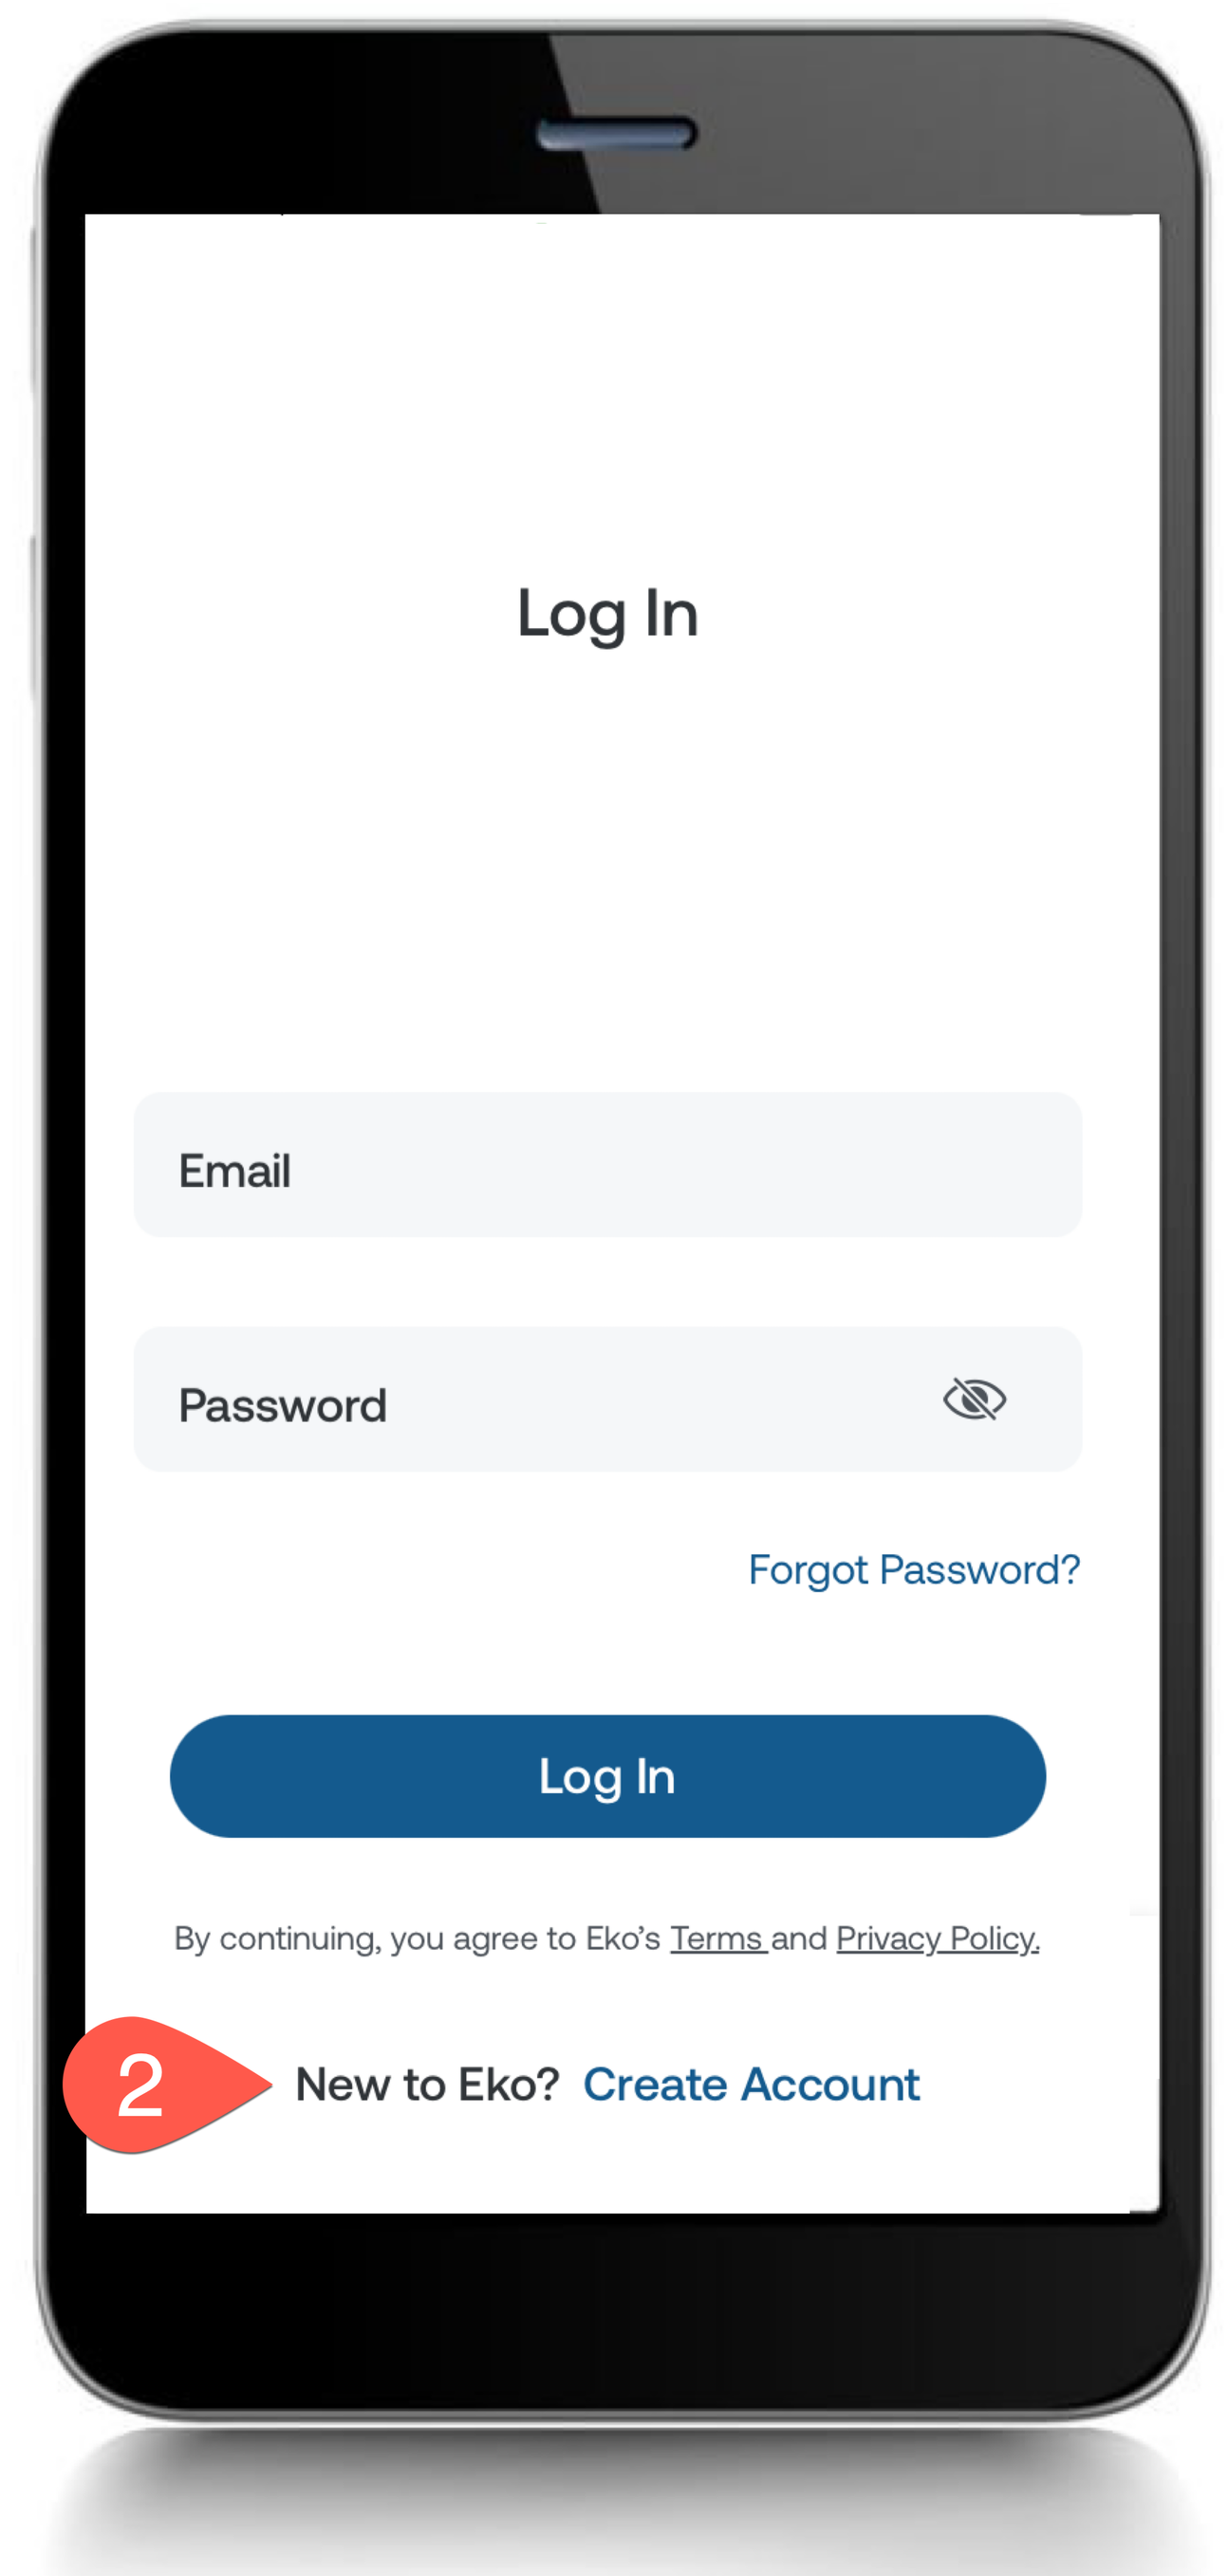 Sign-in screen of the Eko App with an arrow pointing to the Create account link.